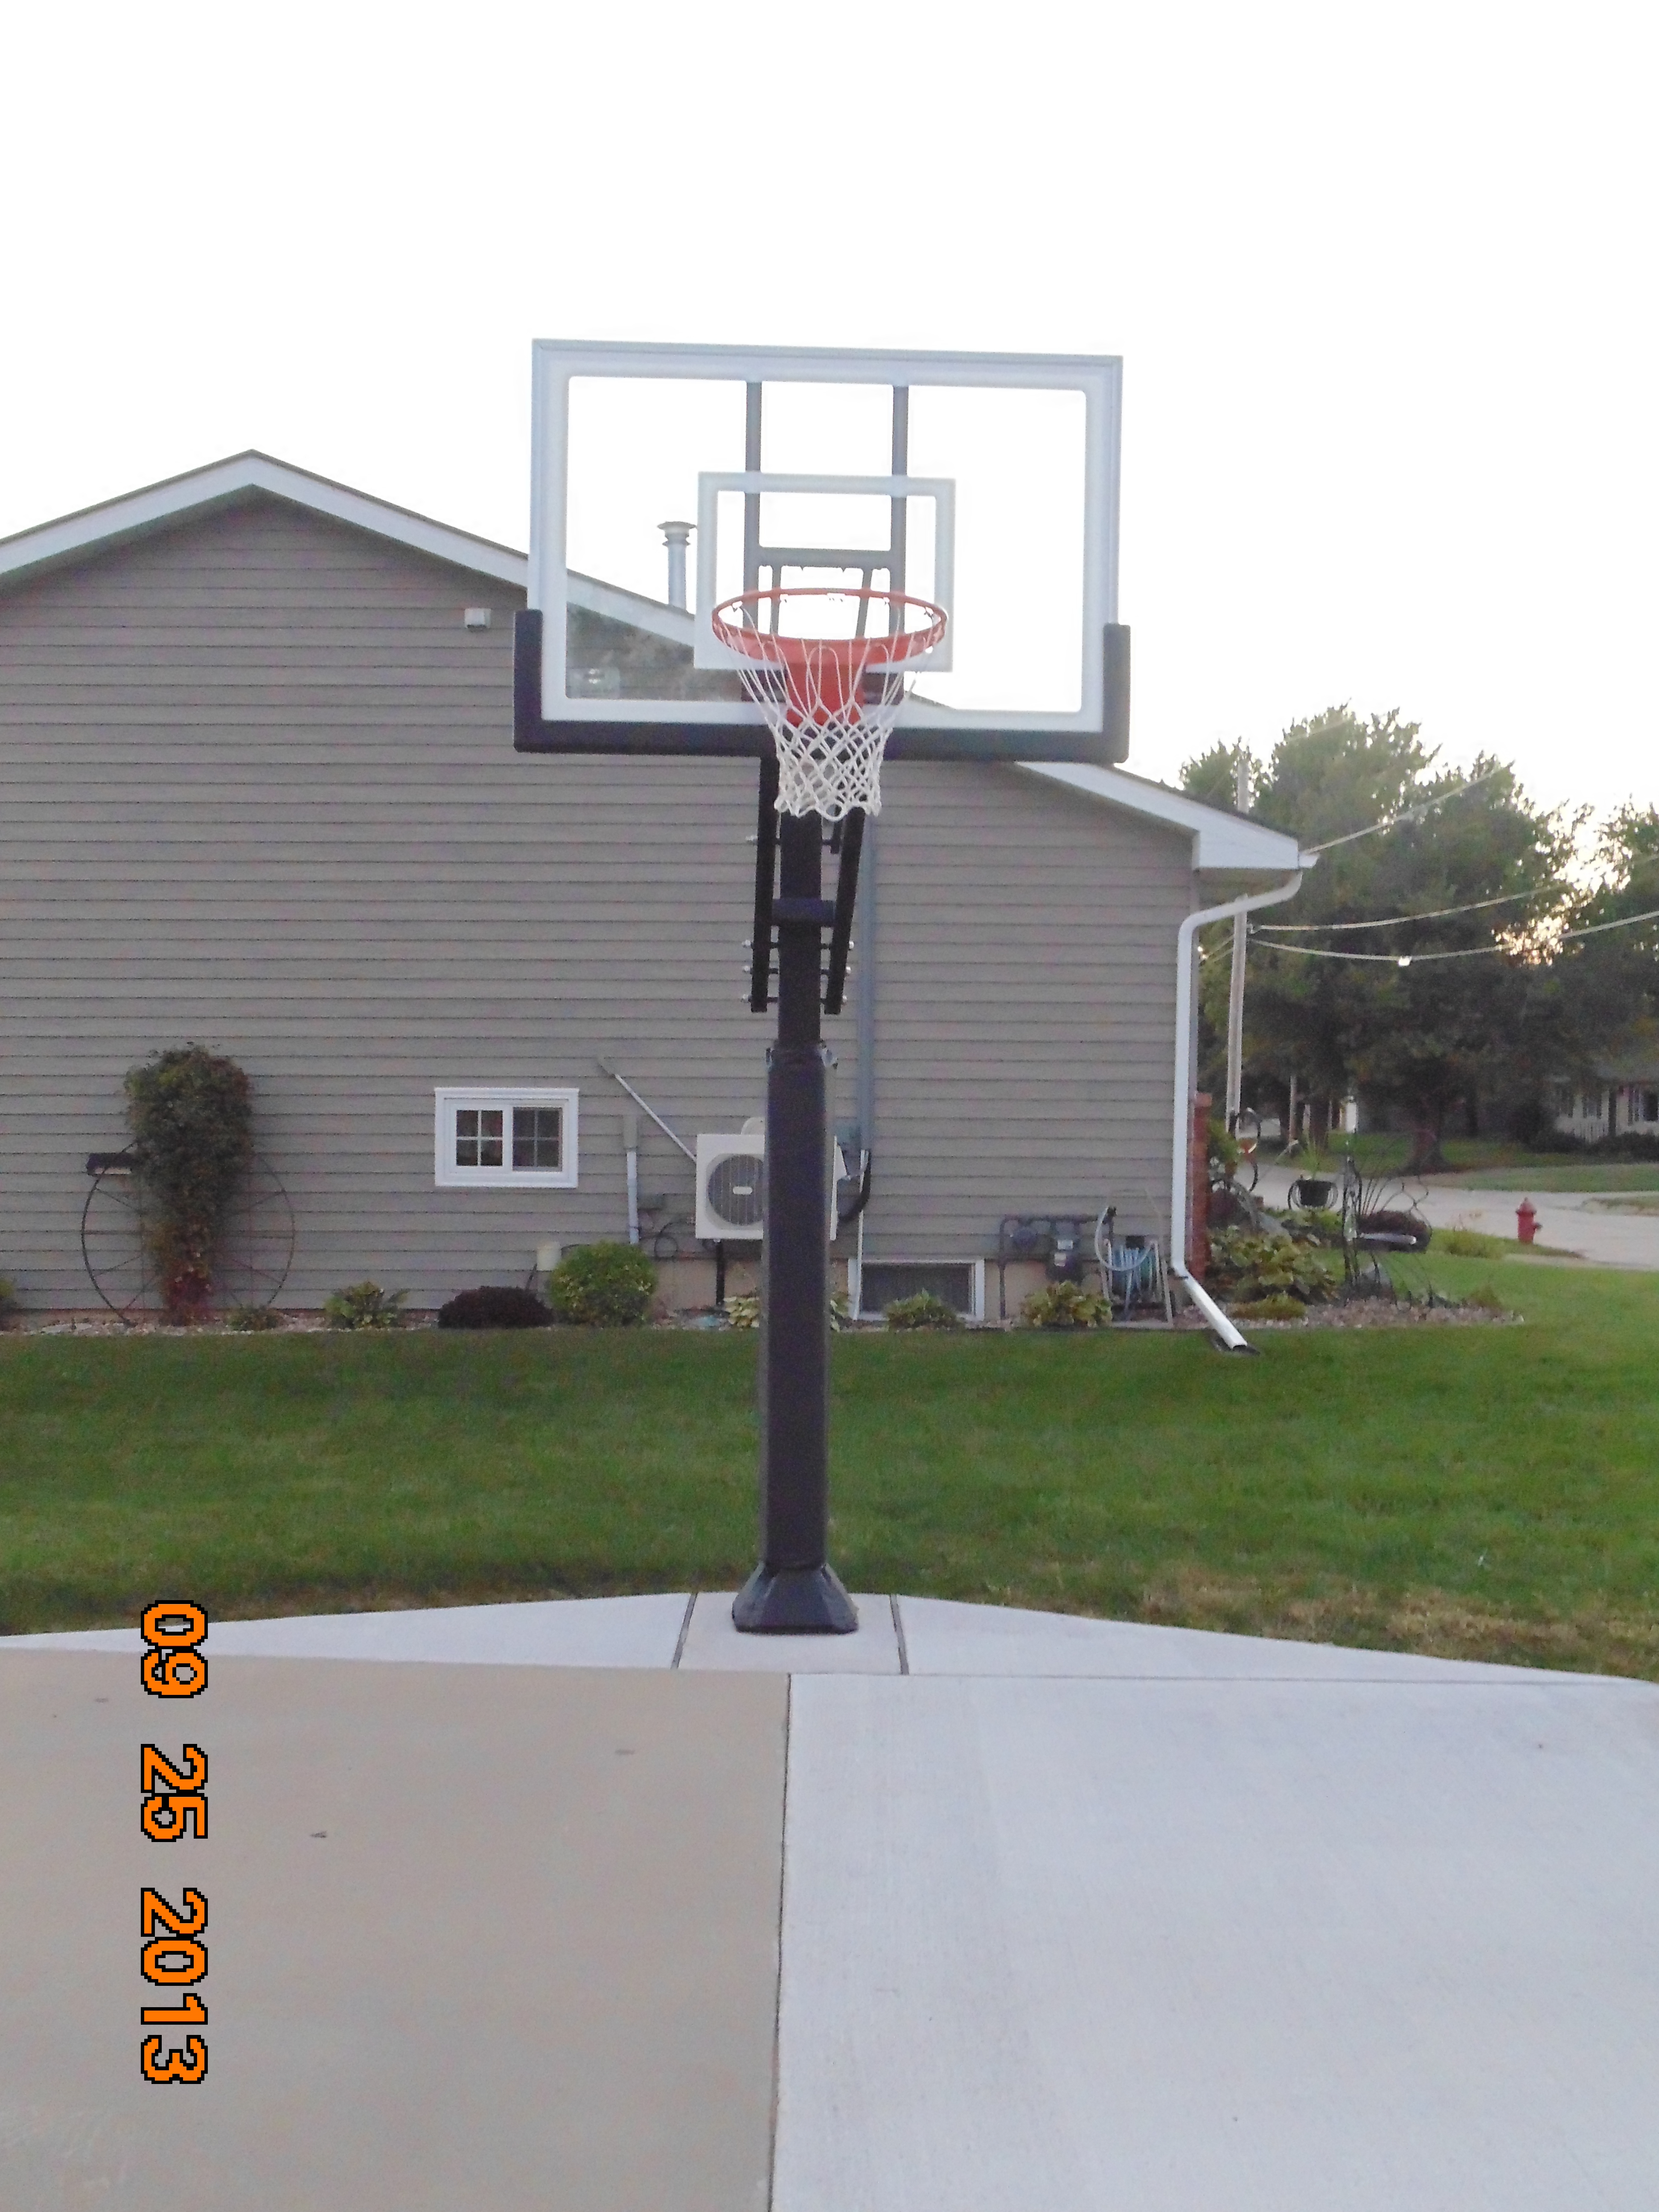 There's a front view of the hoop system.